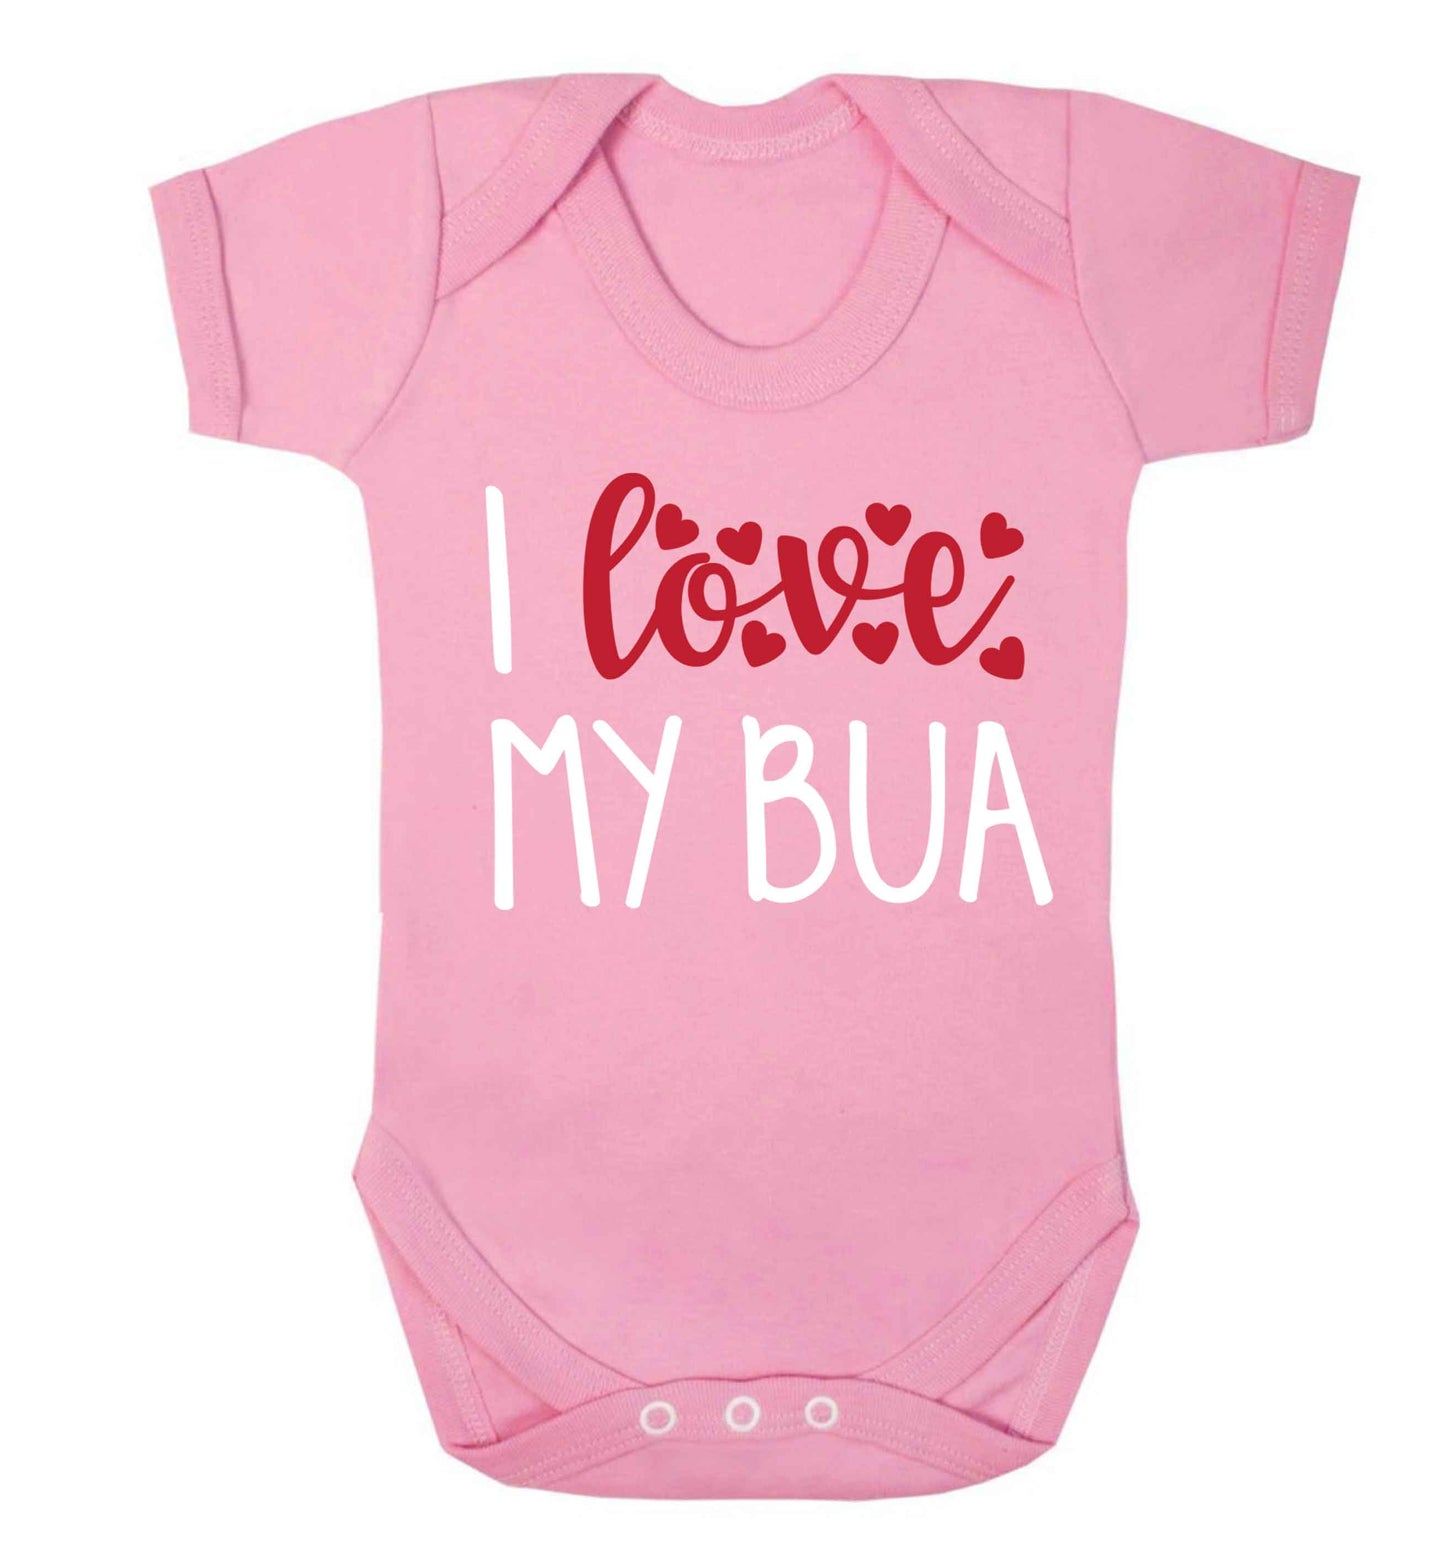 I love my bua Baby Vest pale pink 18-24 months